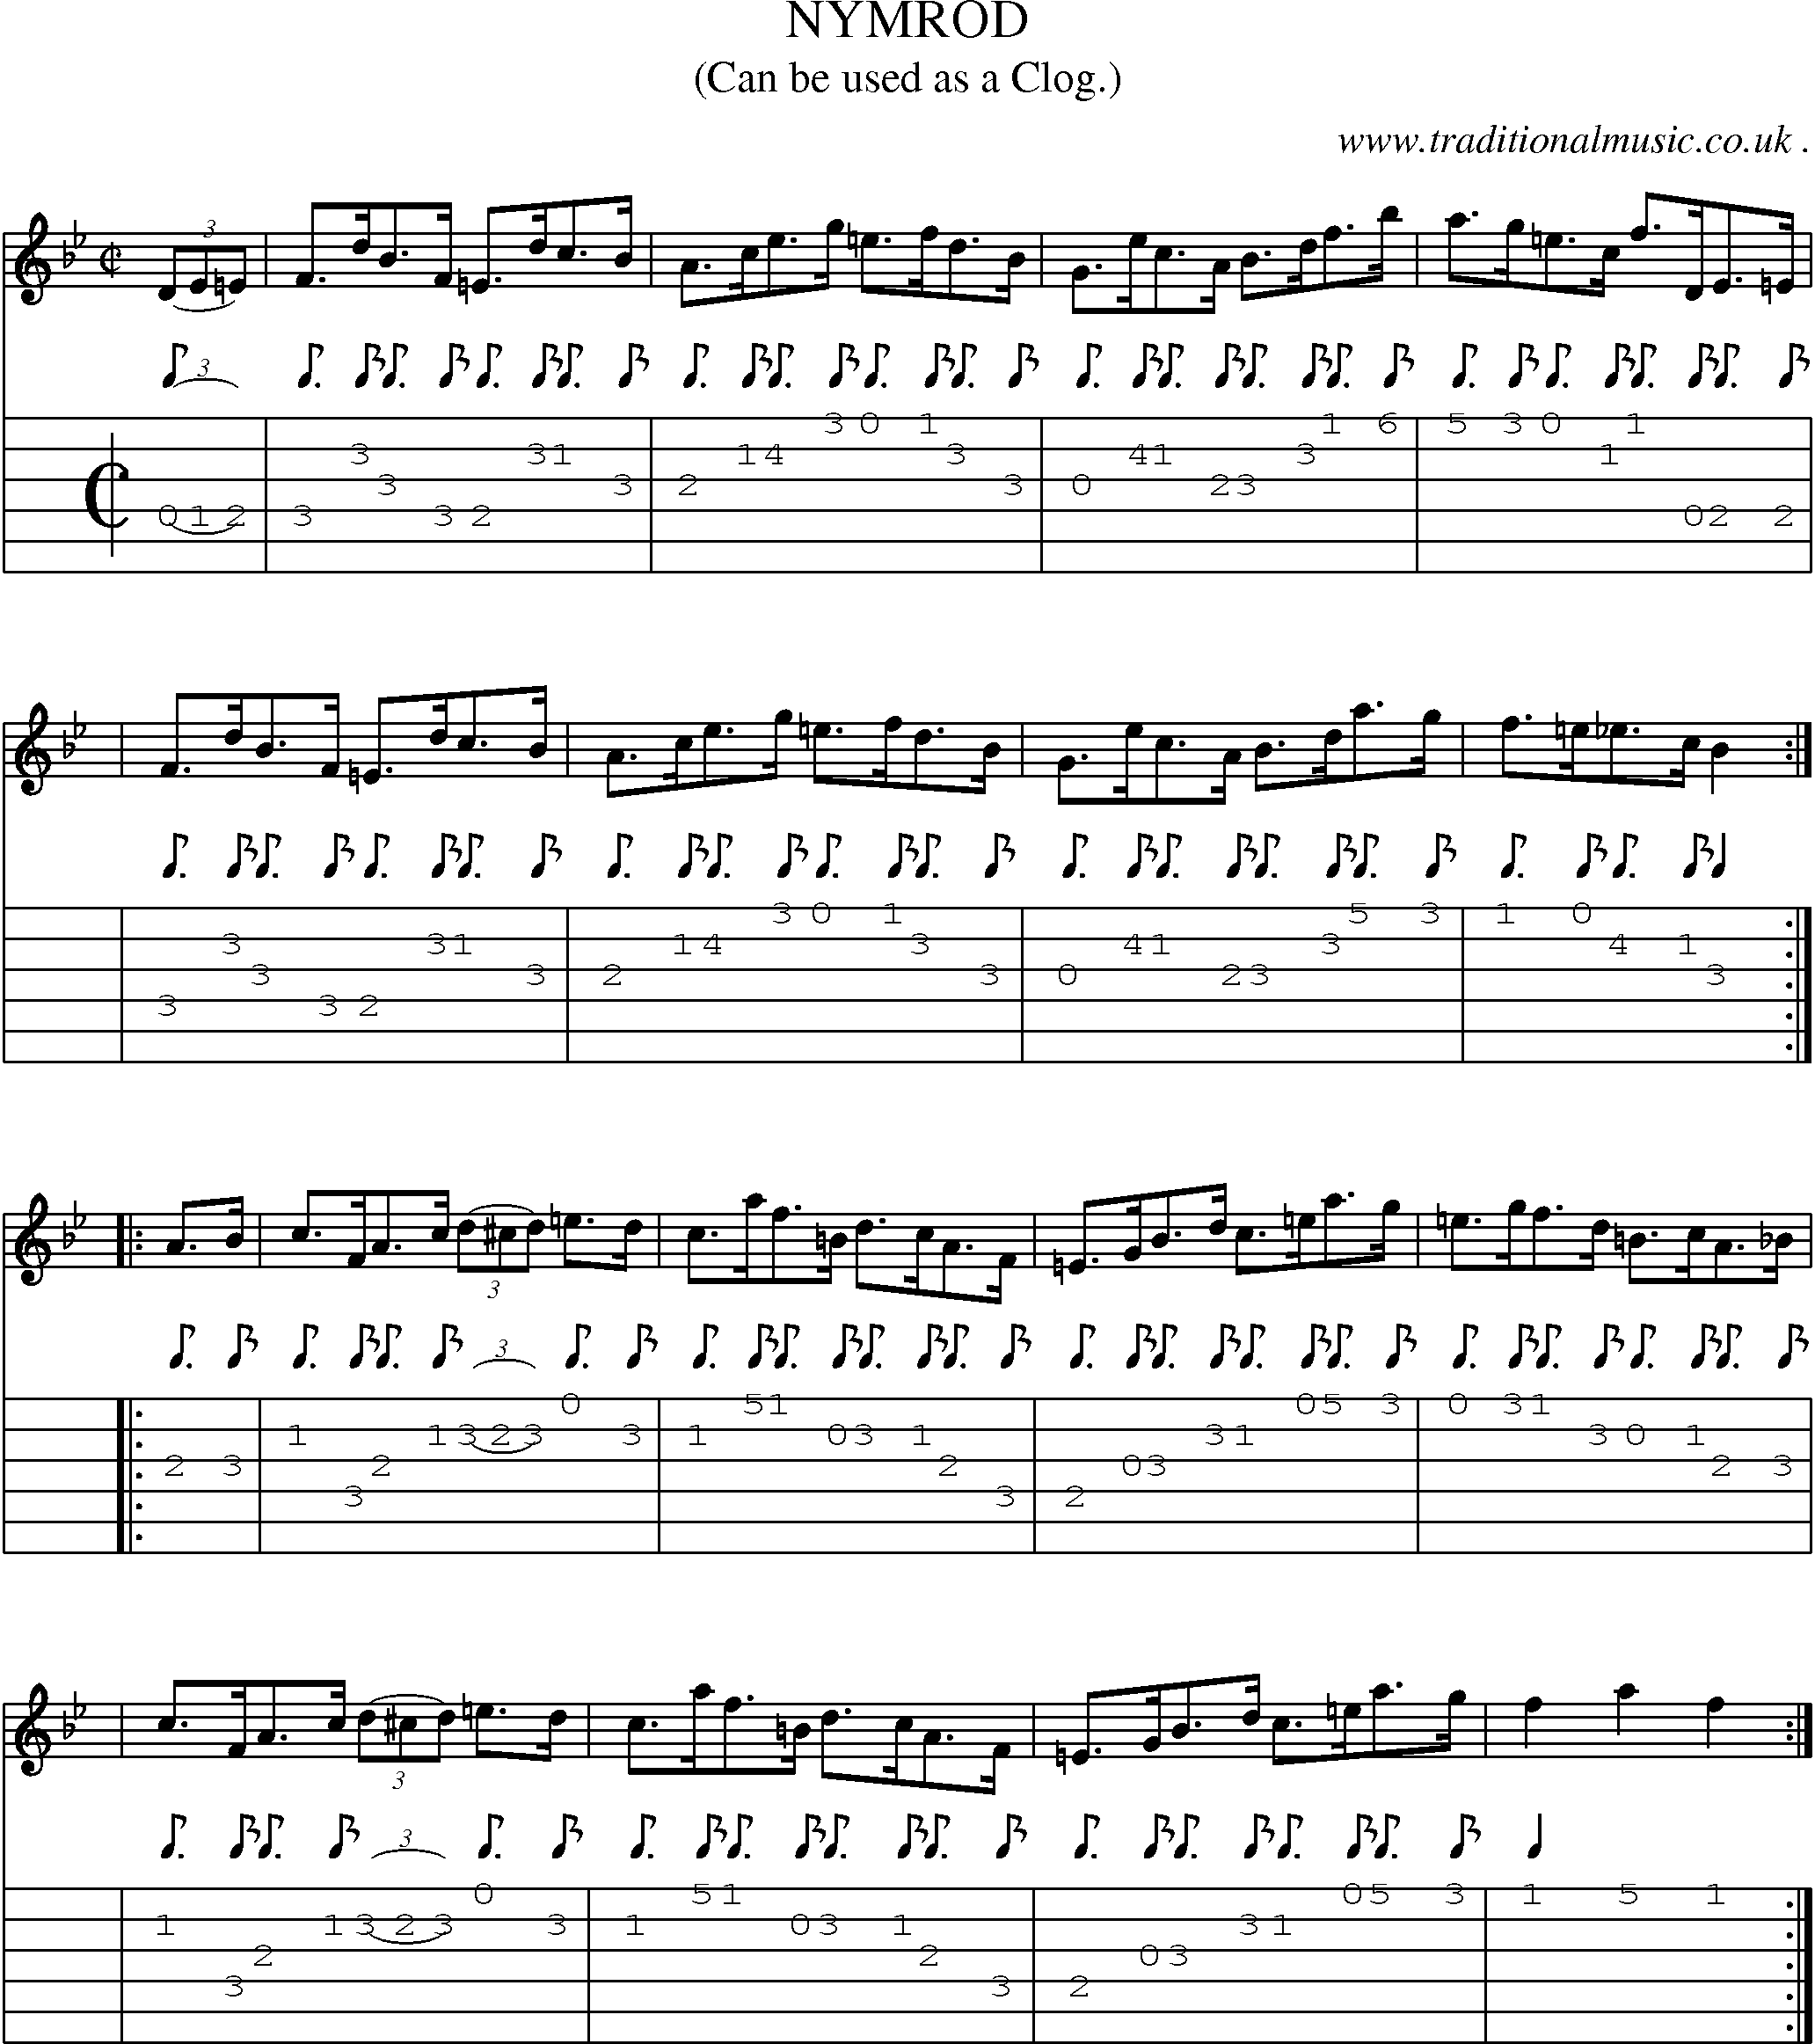 Sheet-Music and Guitar Tabs for Nymrod